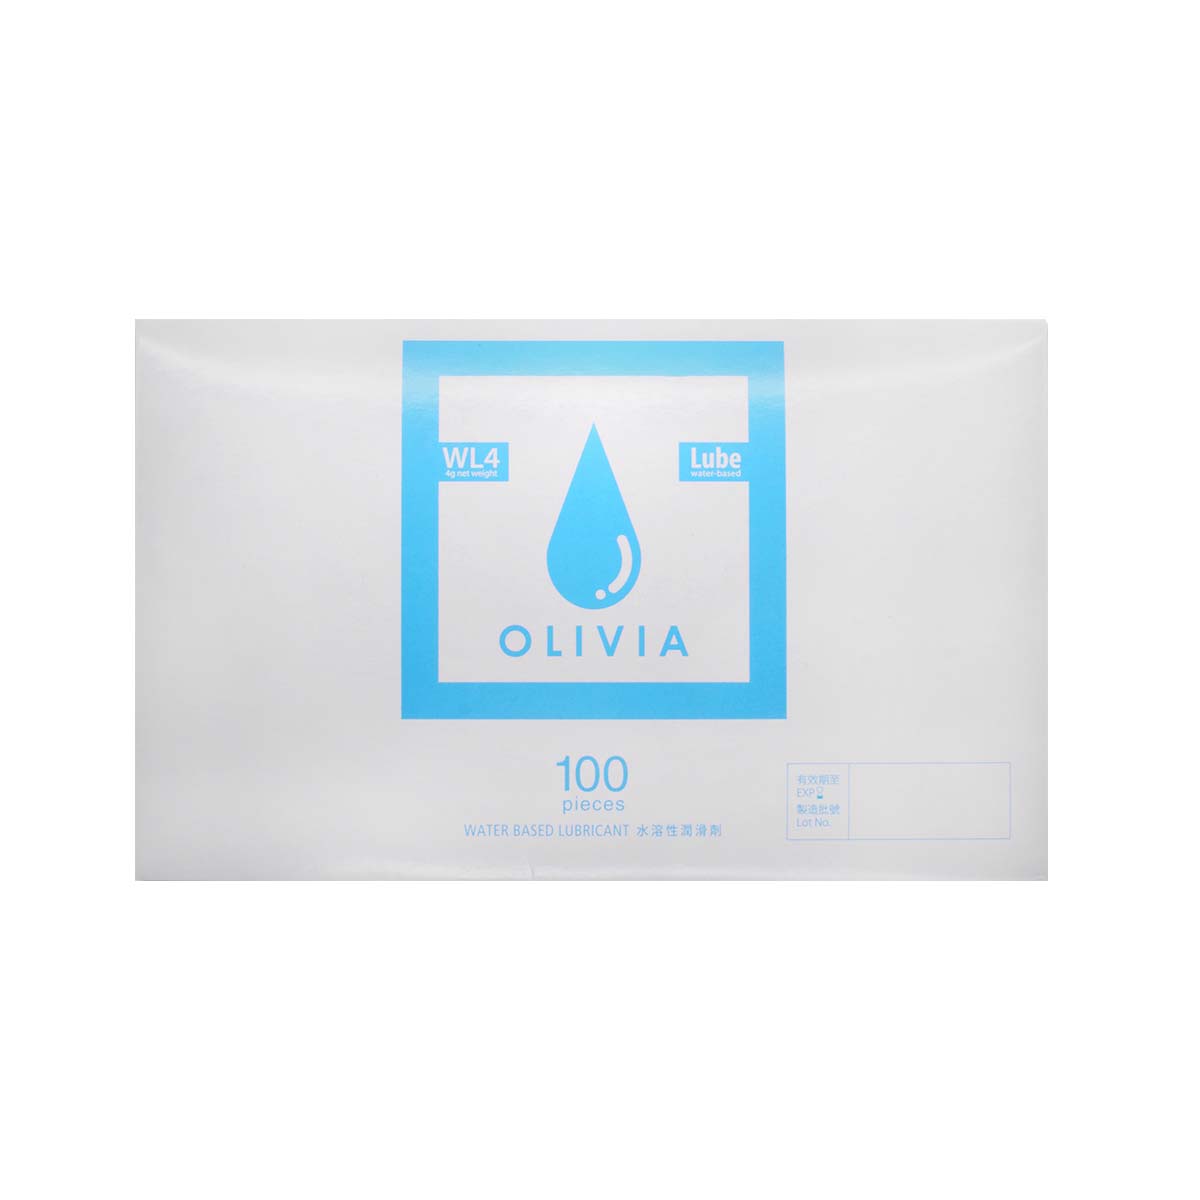 Olivia WL4 sachet 100 pieces Water-based Lubricant-p_2